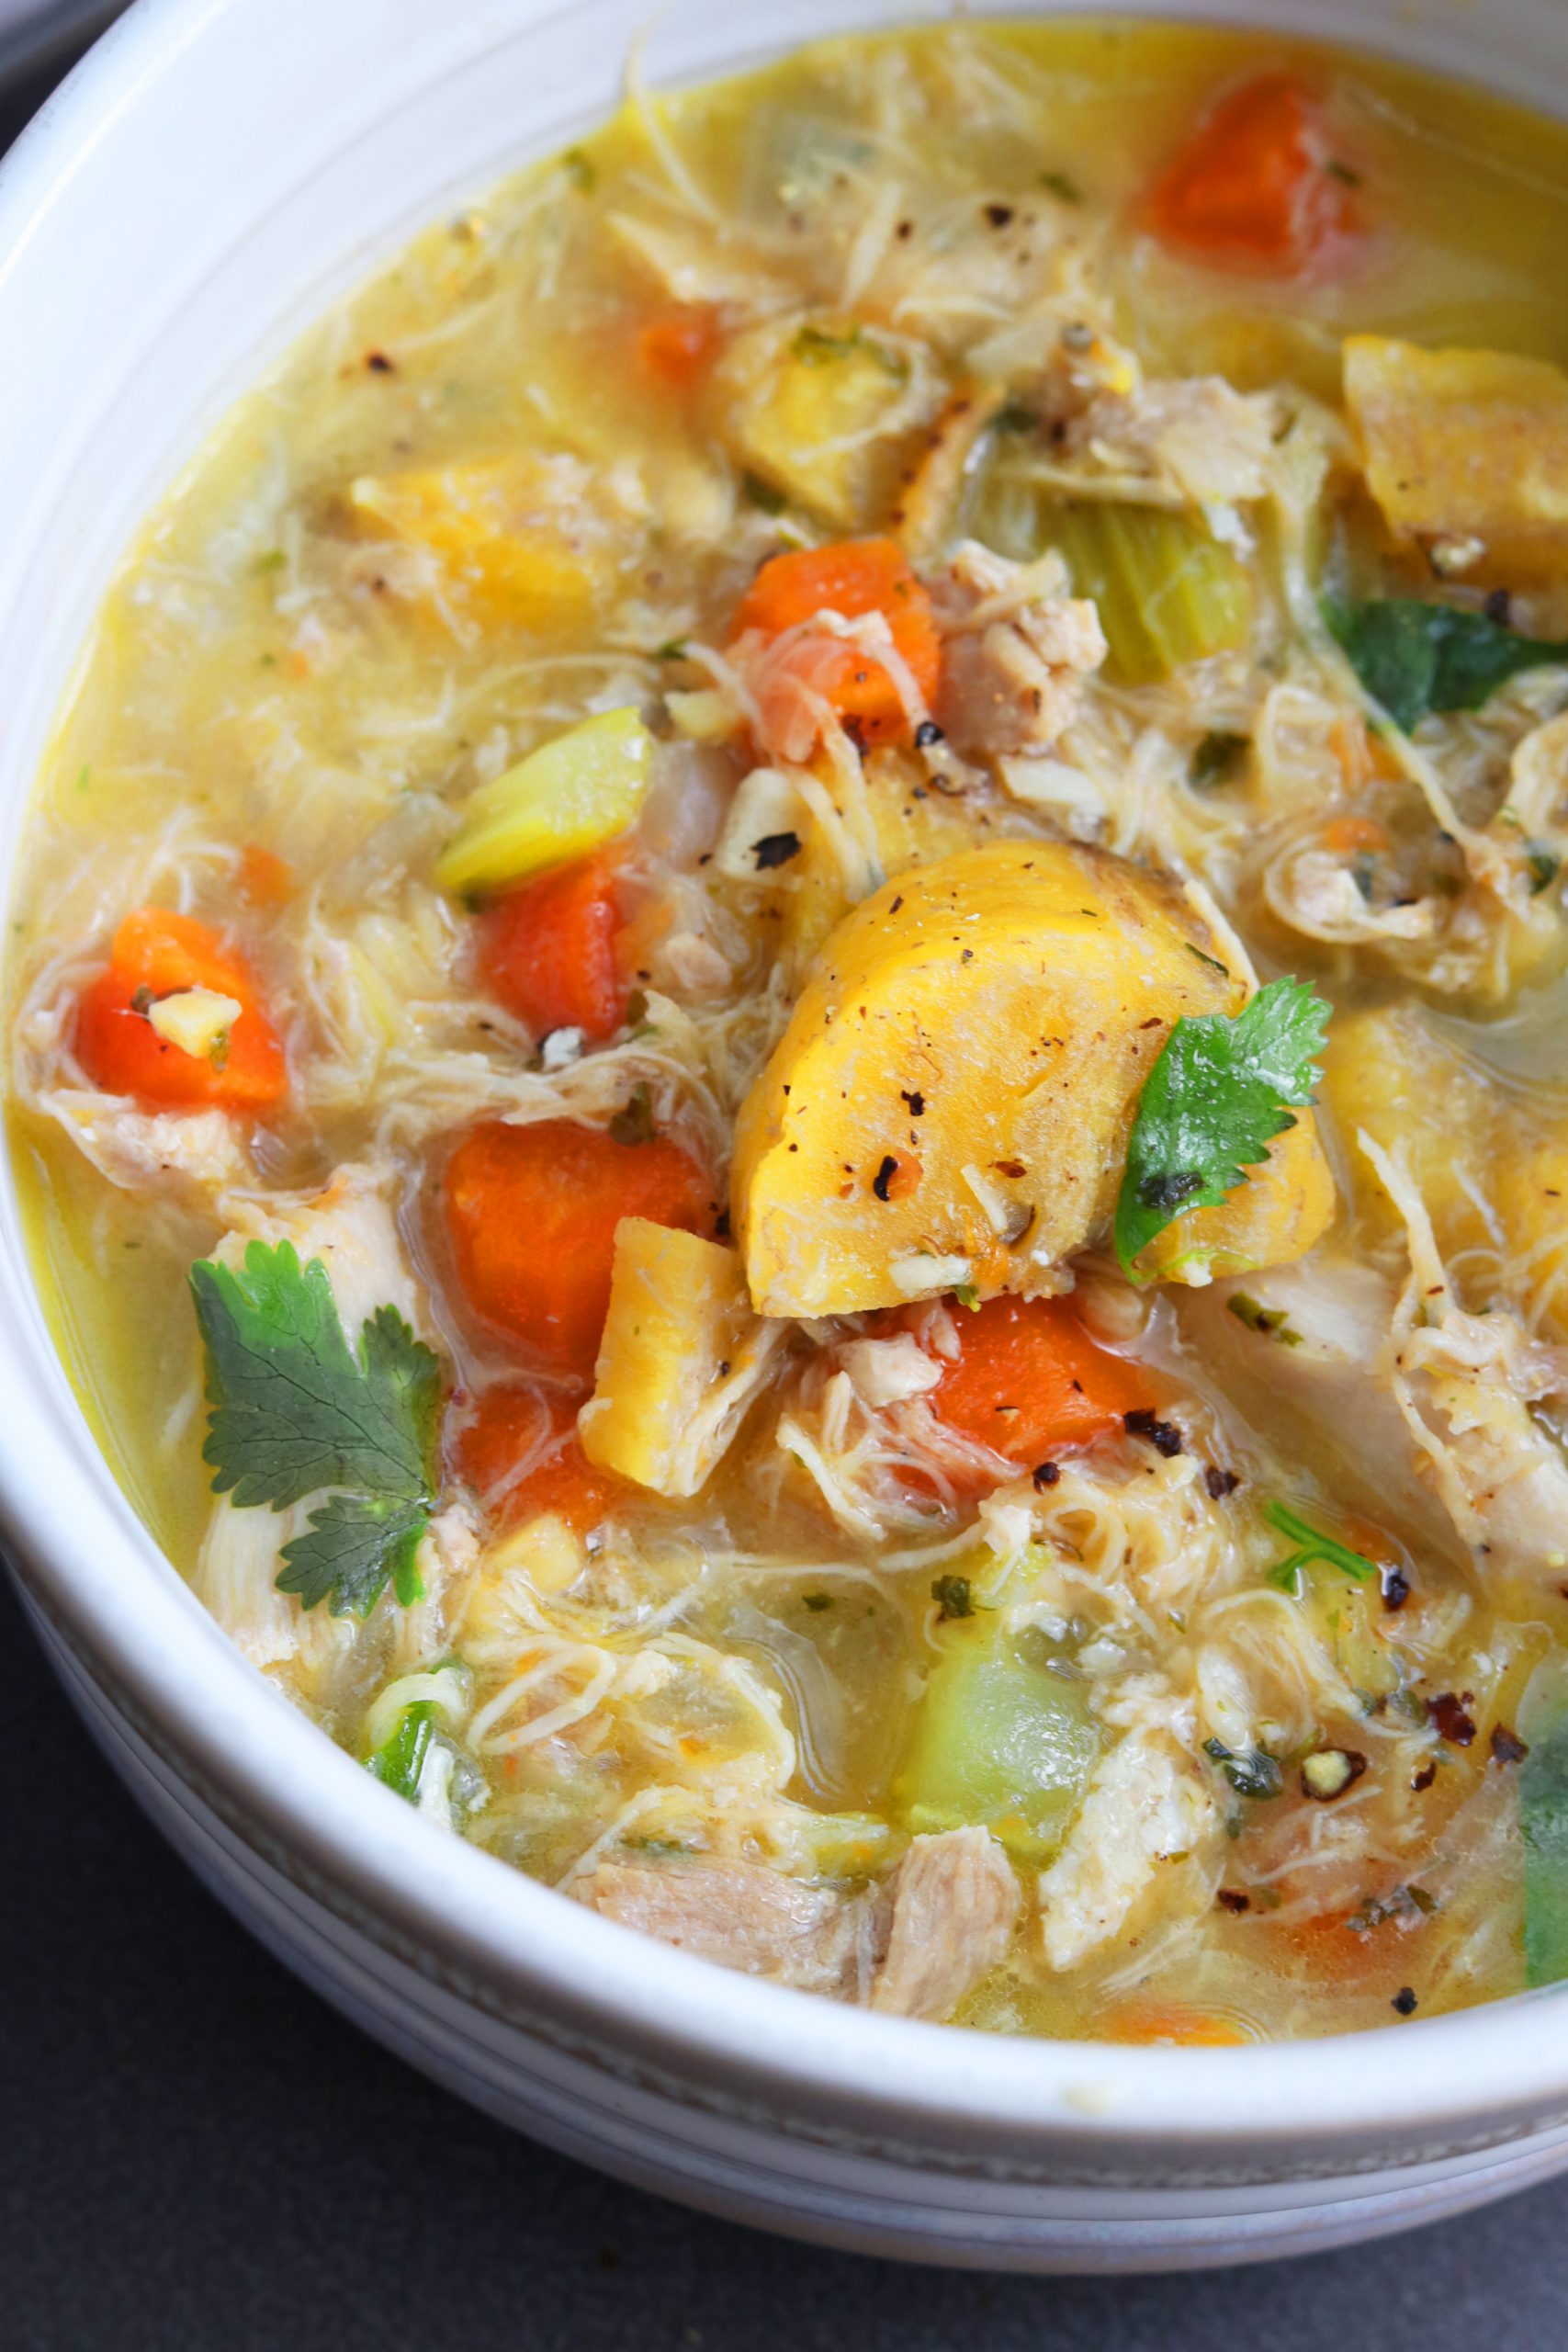 Ginger Chicken Soup